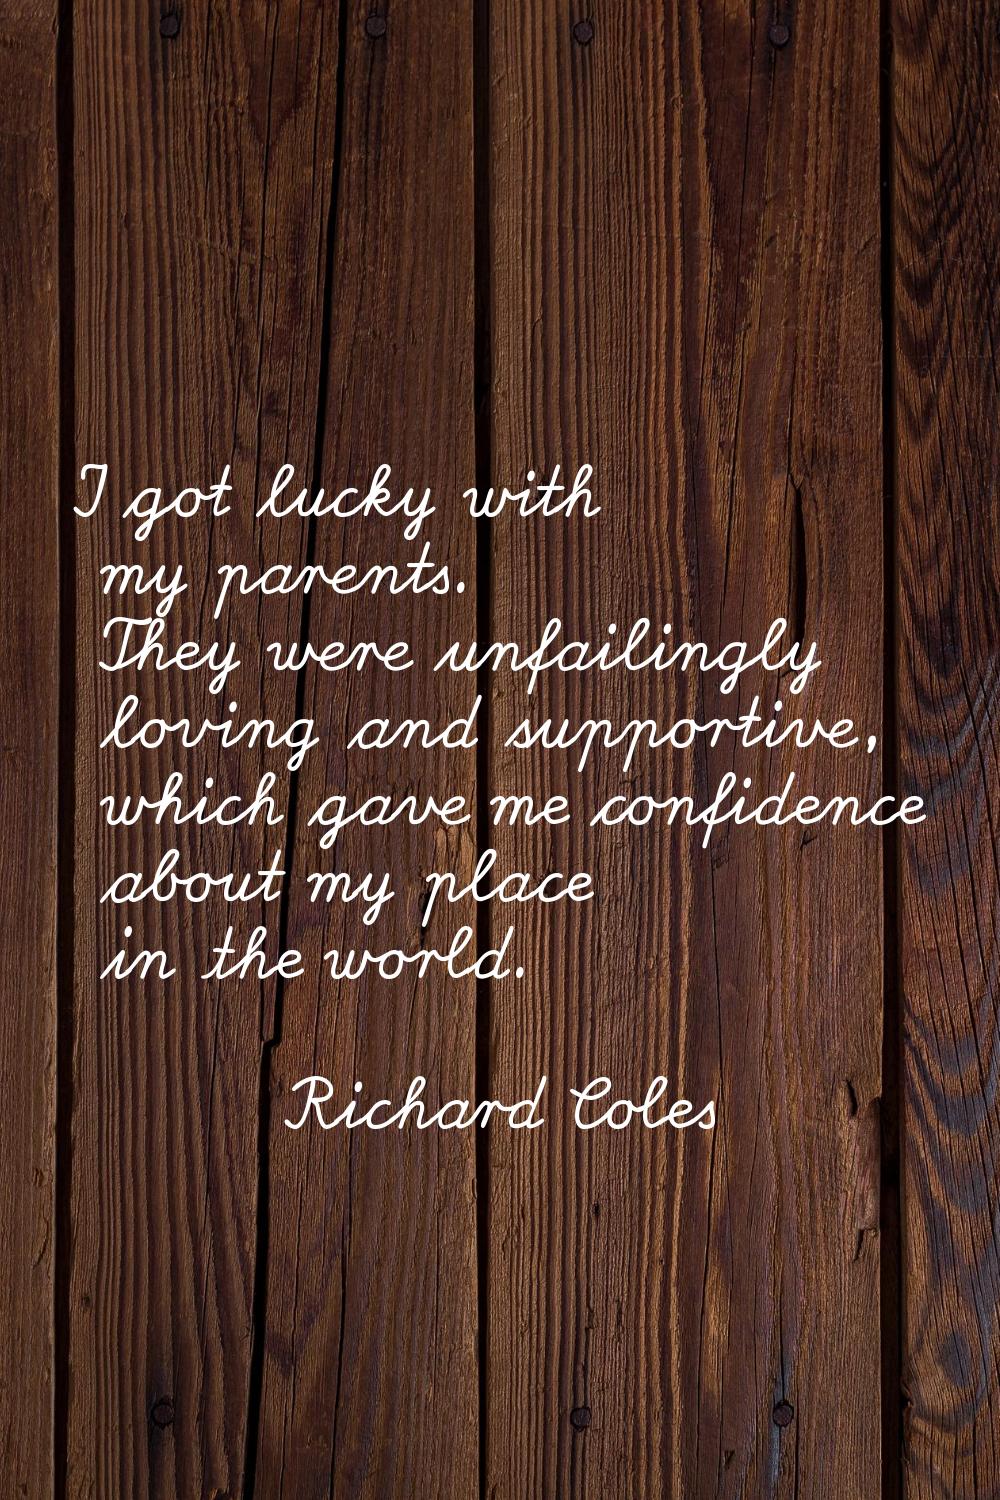 I got lucky with my parents. They were unfailingly loving and supportive, which gave me confidence 